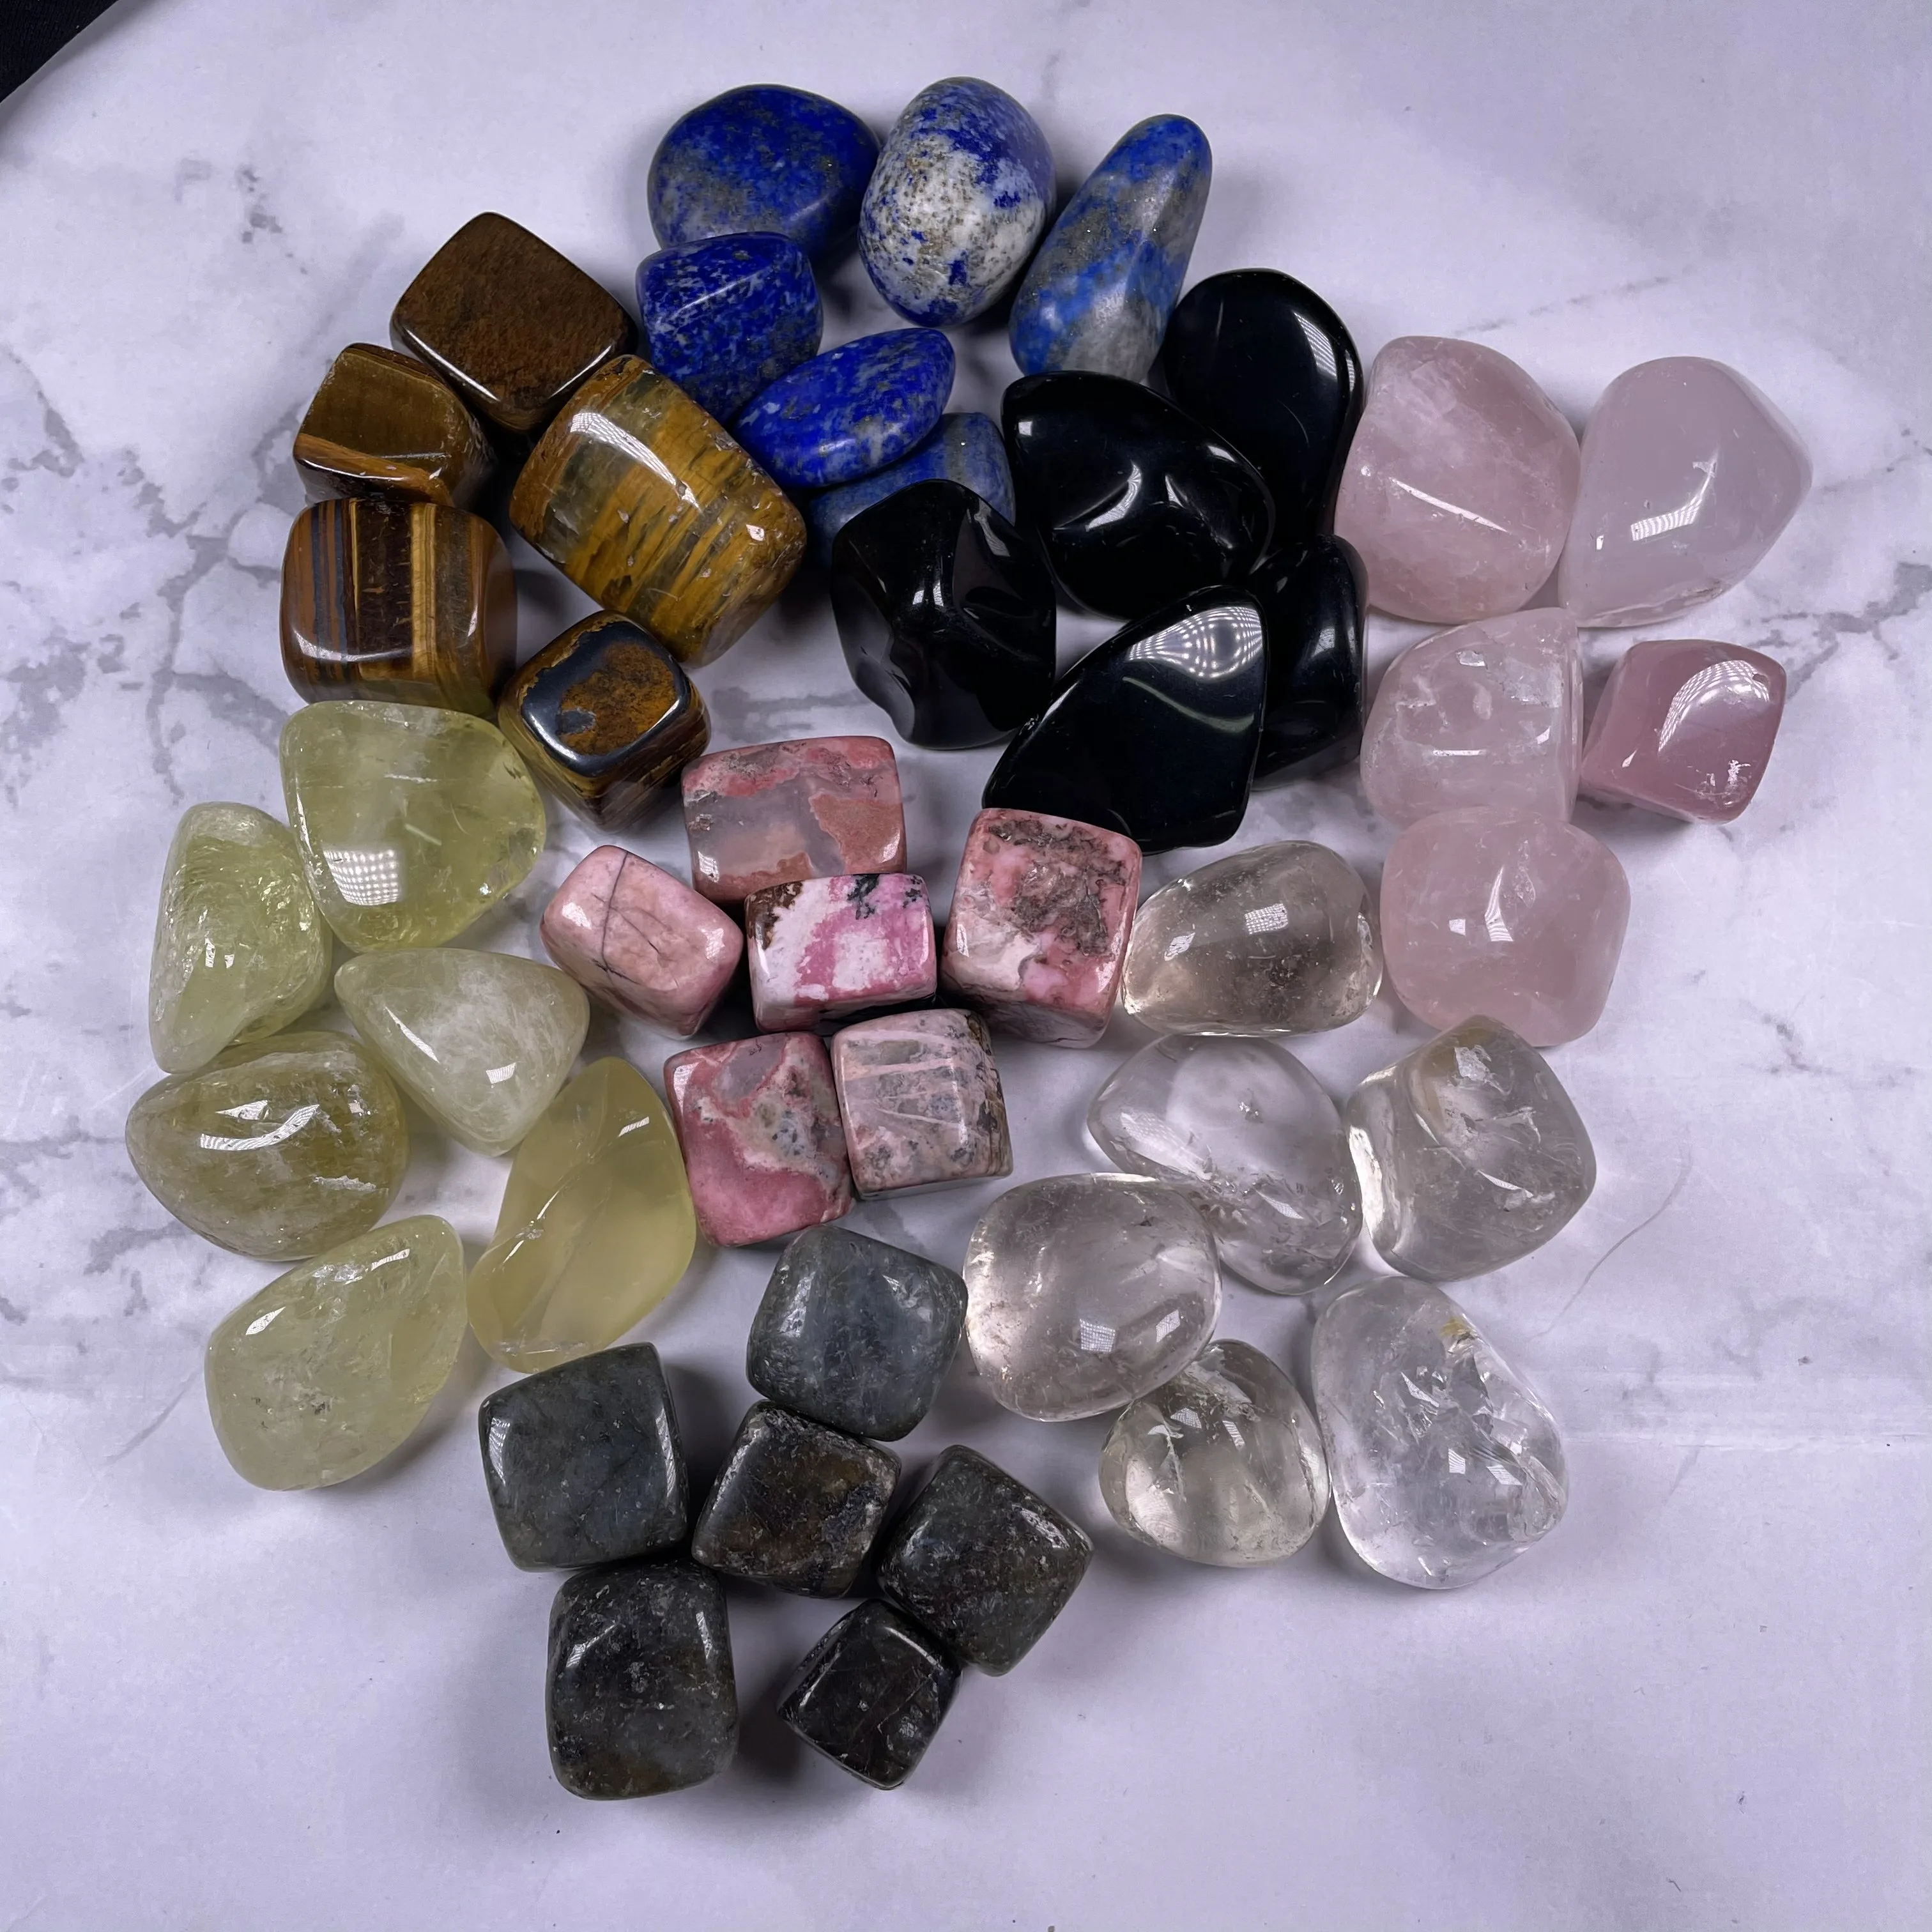 
wholesale crystal clear quartz tumbled stones bulk angel aura quartz tumble stone crystals healing stones for healing 